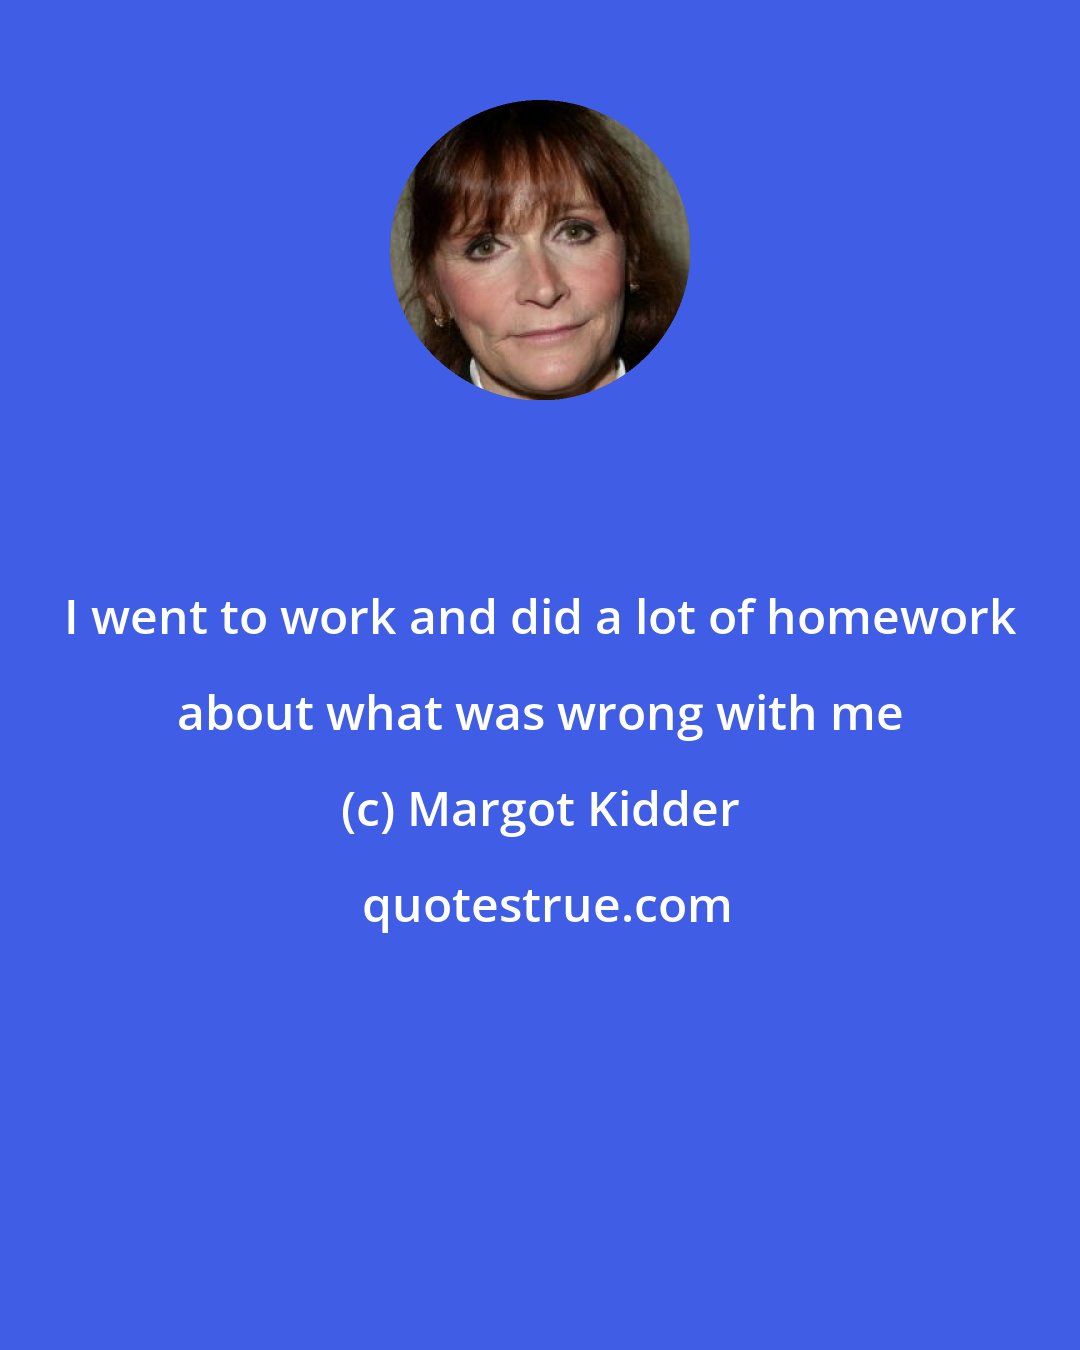 Margot Kidder: I went to work and did a lot of homework about what was wrong with me